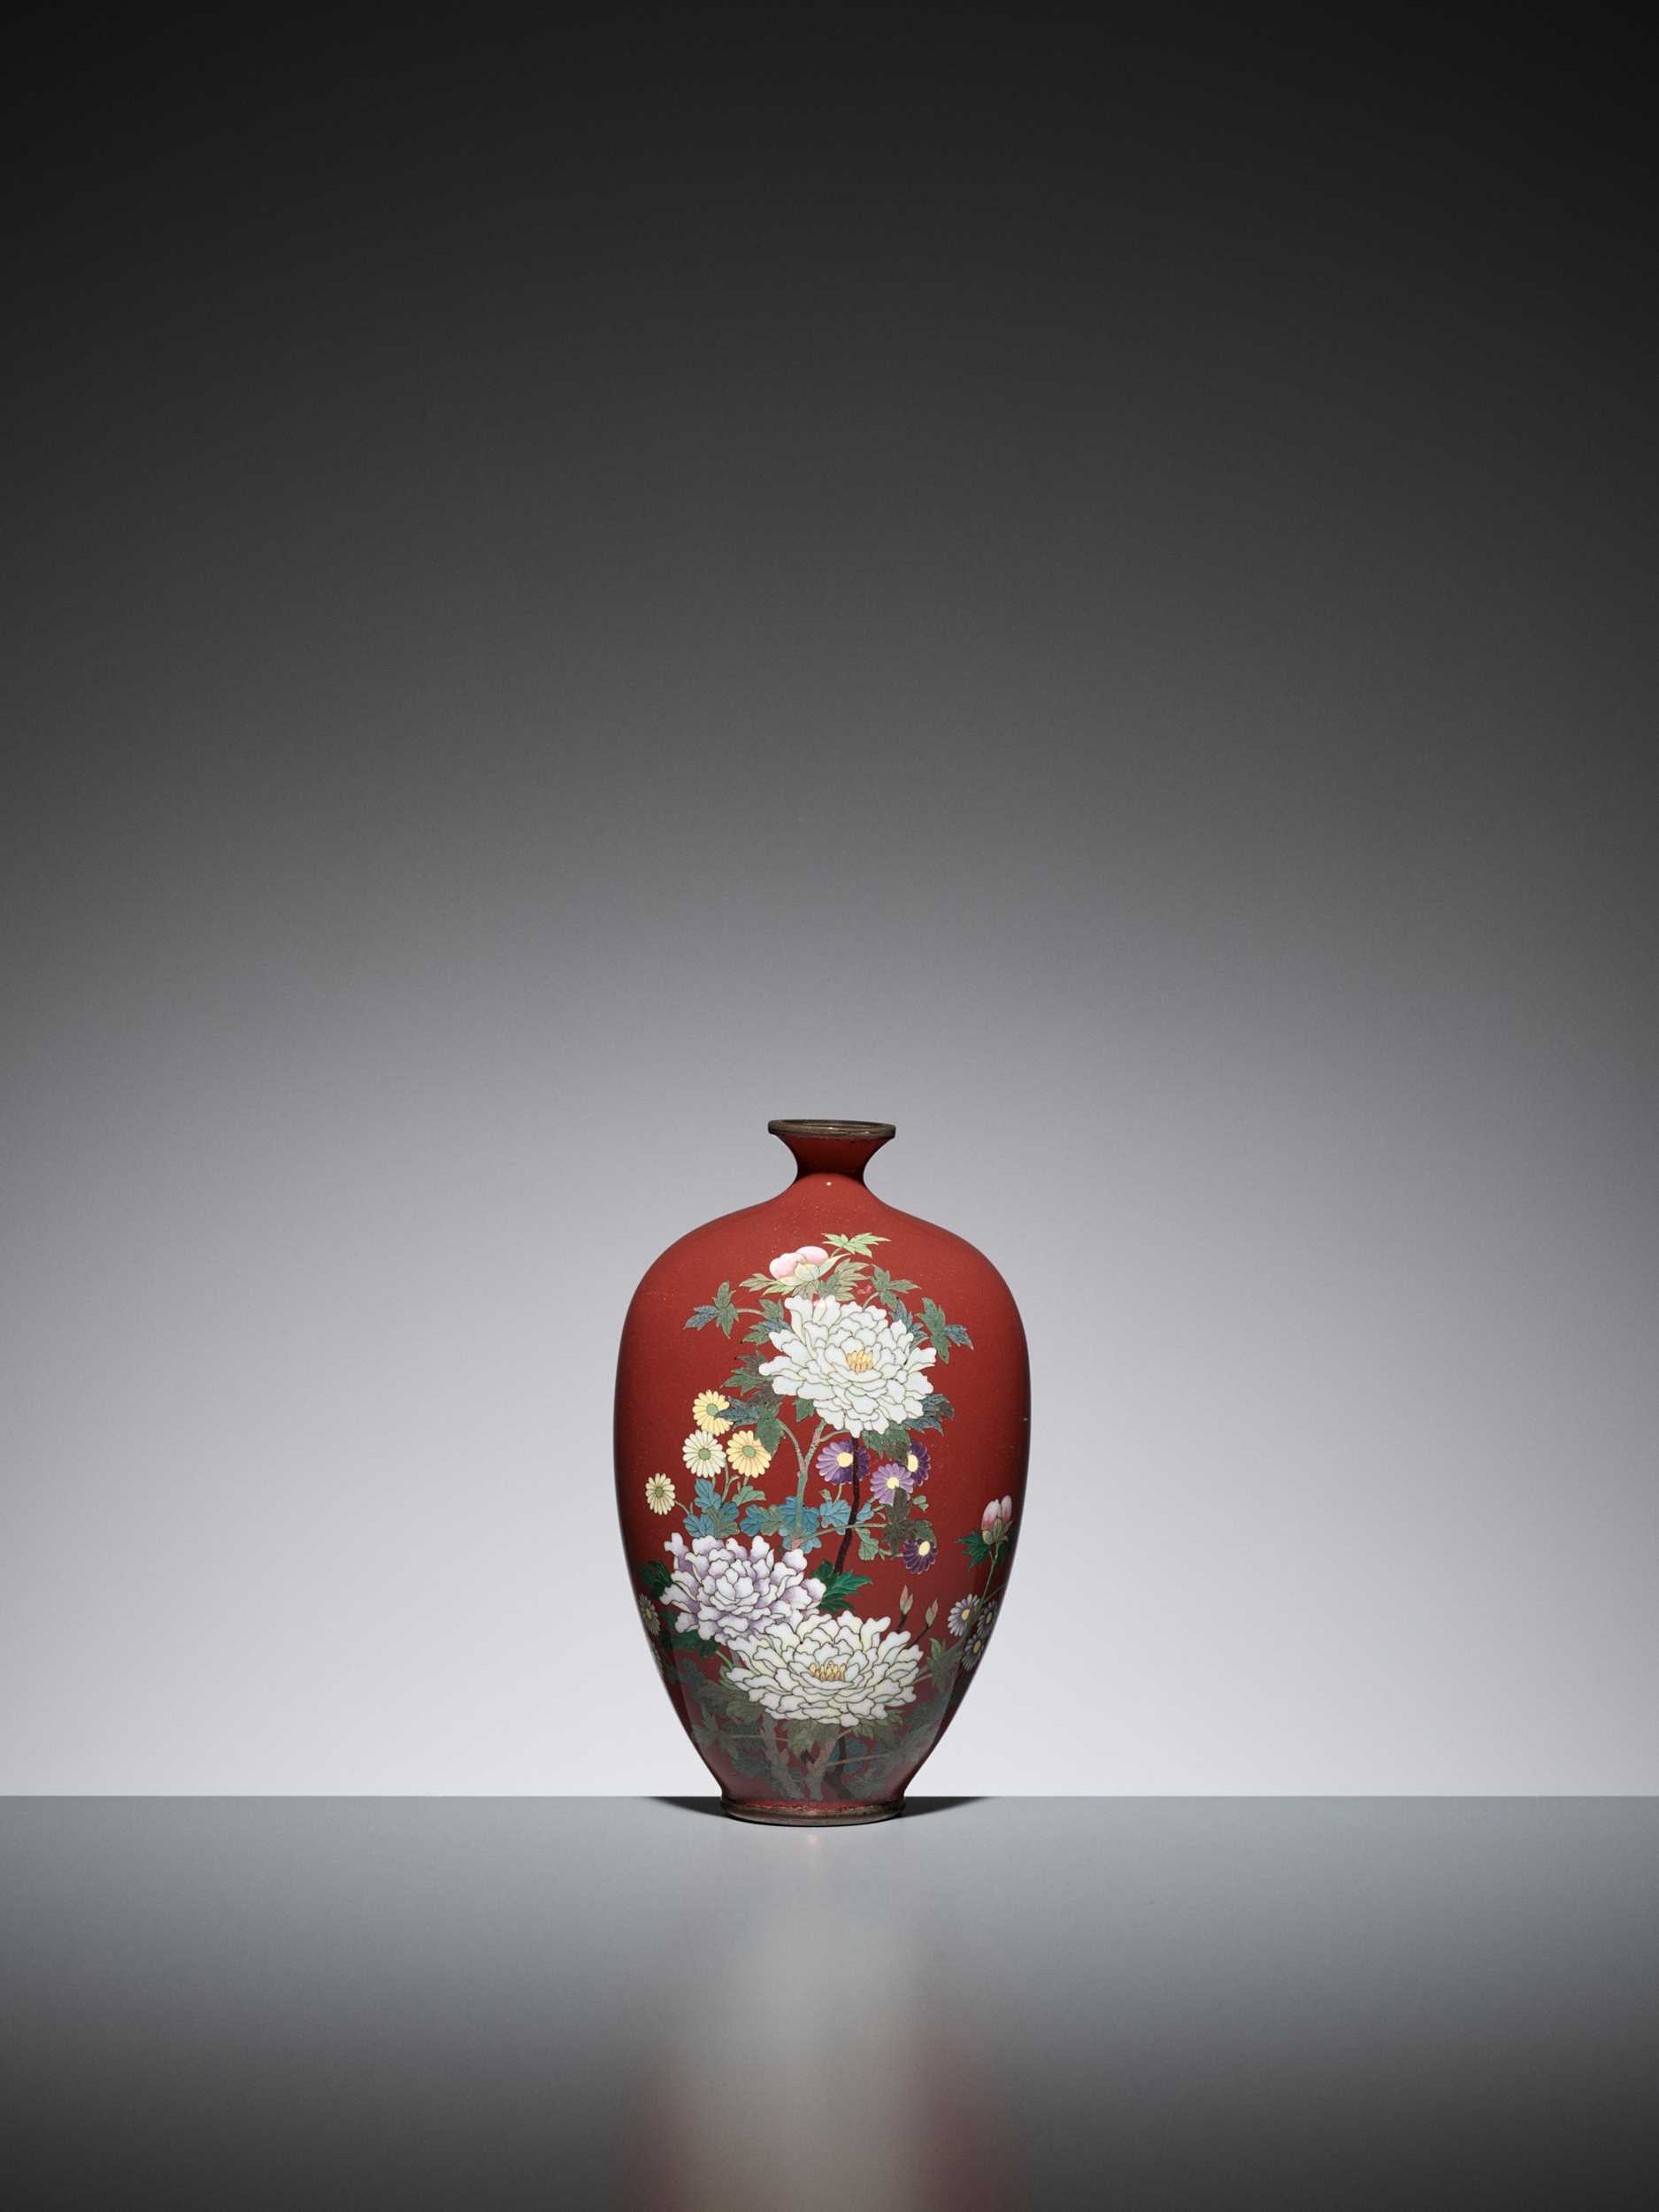 Lot 73 - AN UNUSUAL IRON-RED CLOISONNÉ ENAMEL VASE WITH PEONY AND CHRYSANTHEMUM